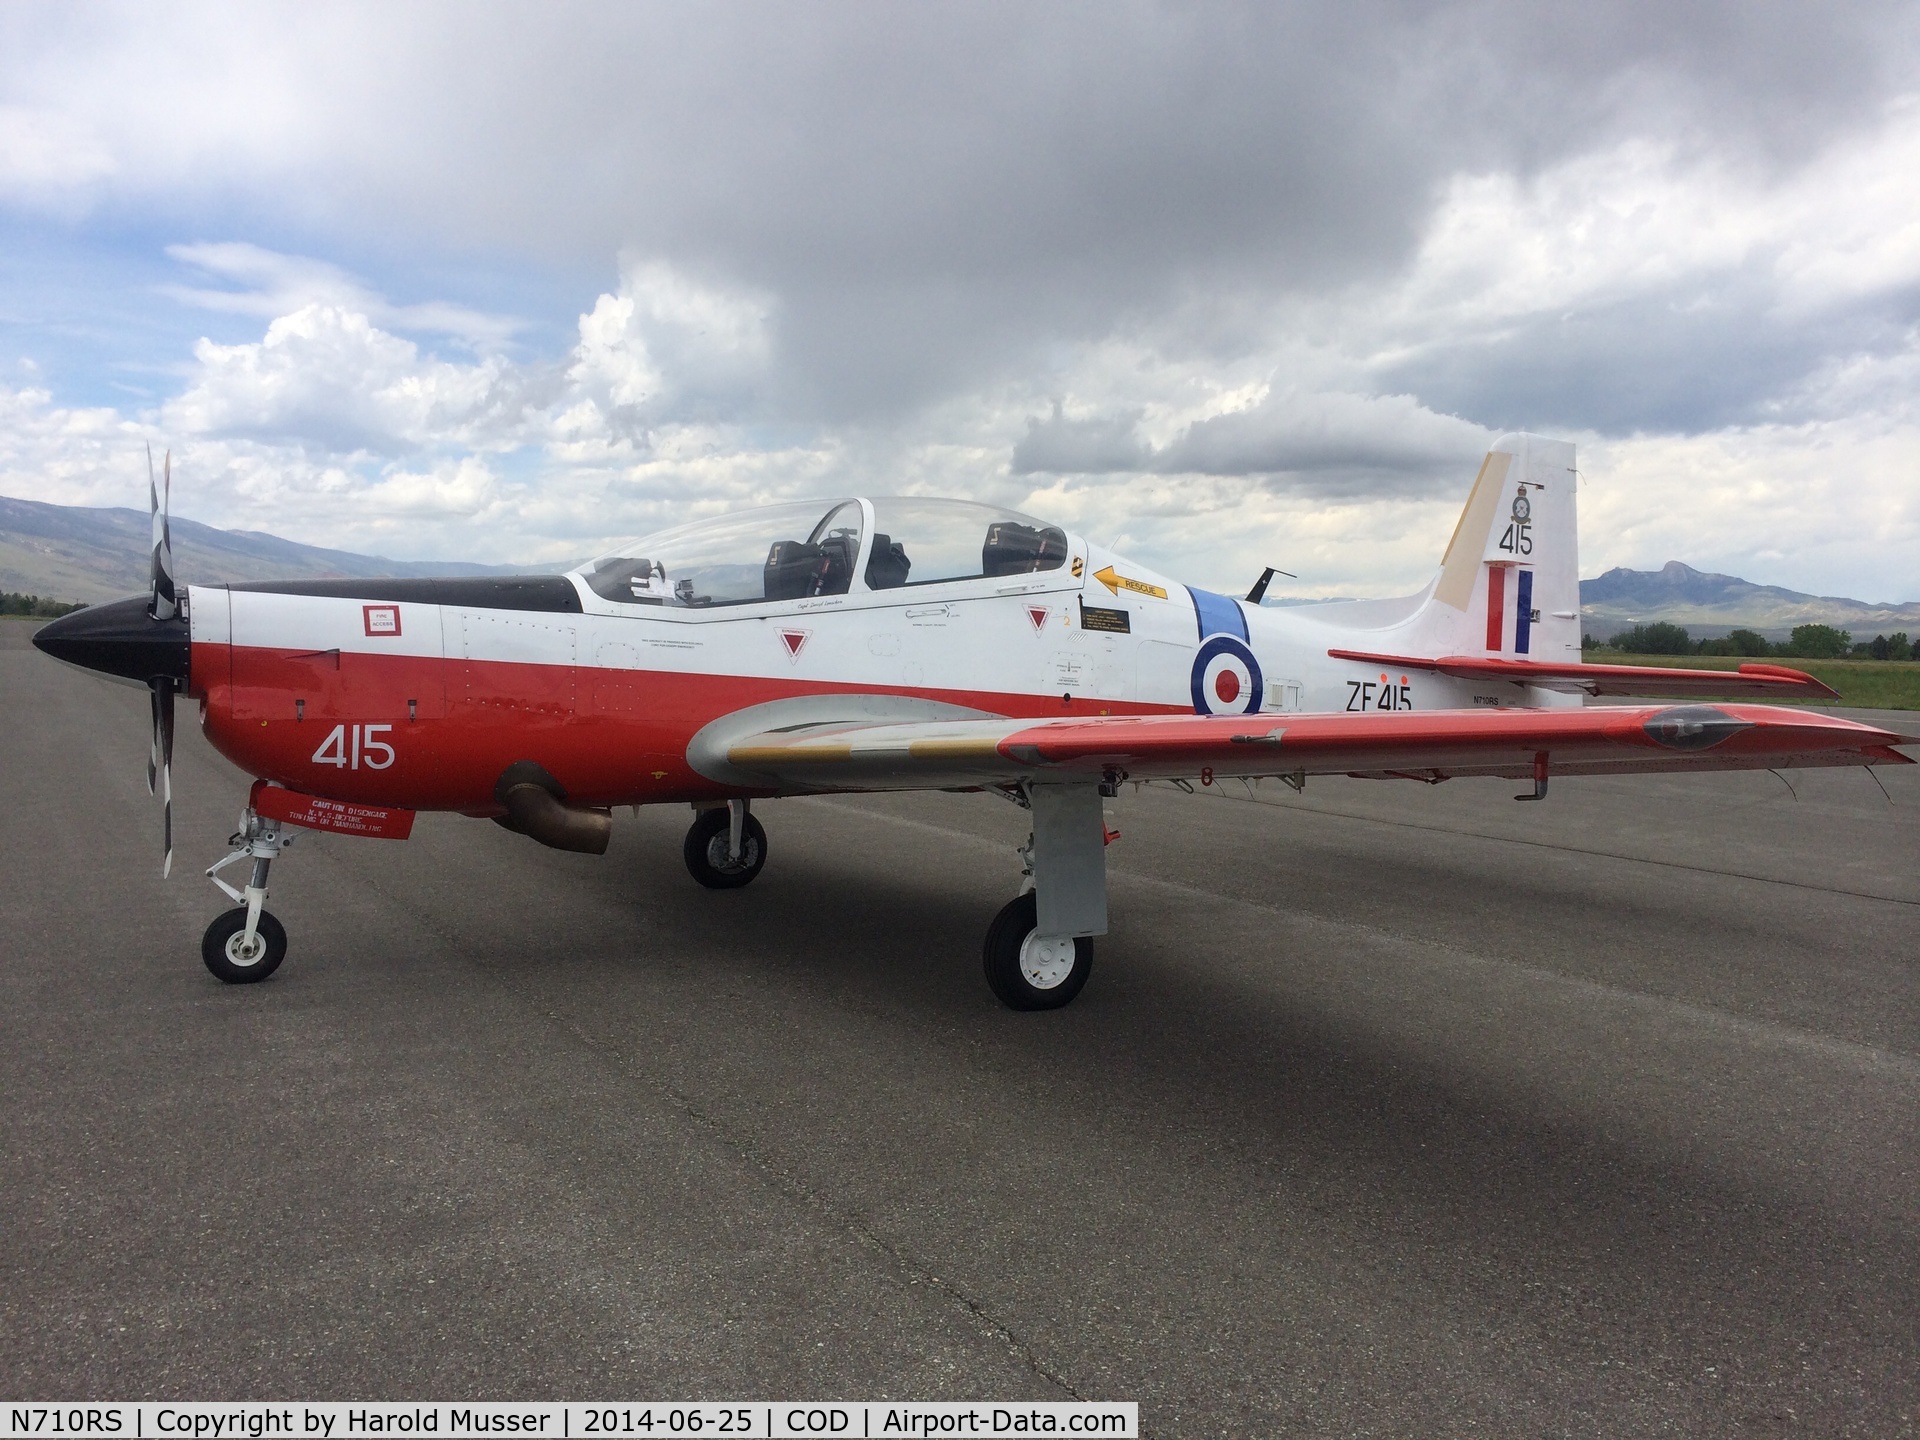 N710RS, 1992 Short S-312 Tucano T1 C/N S134/T105, Beautiful plane that landed in Cody, WY today.